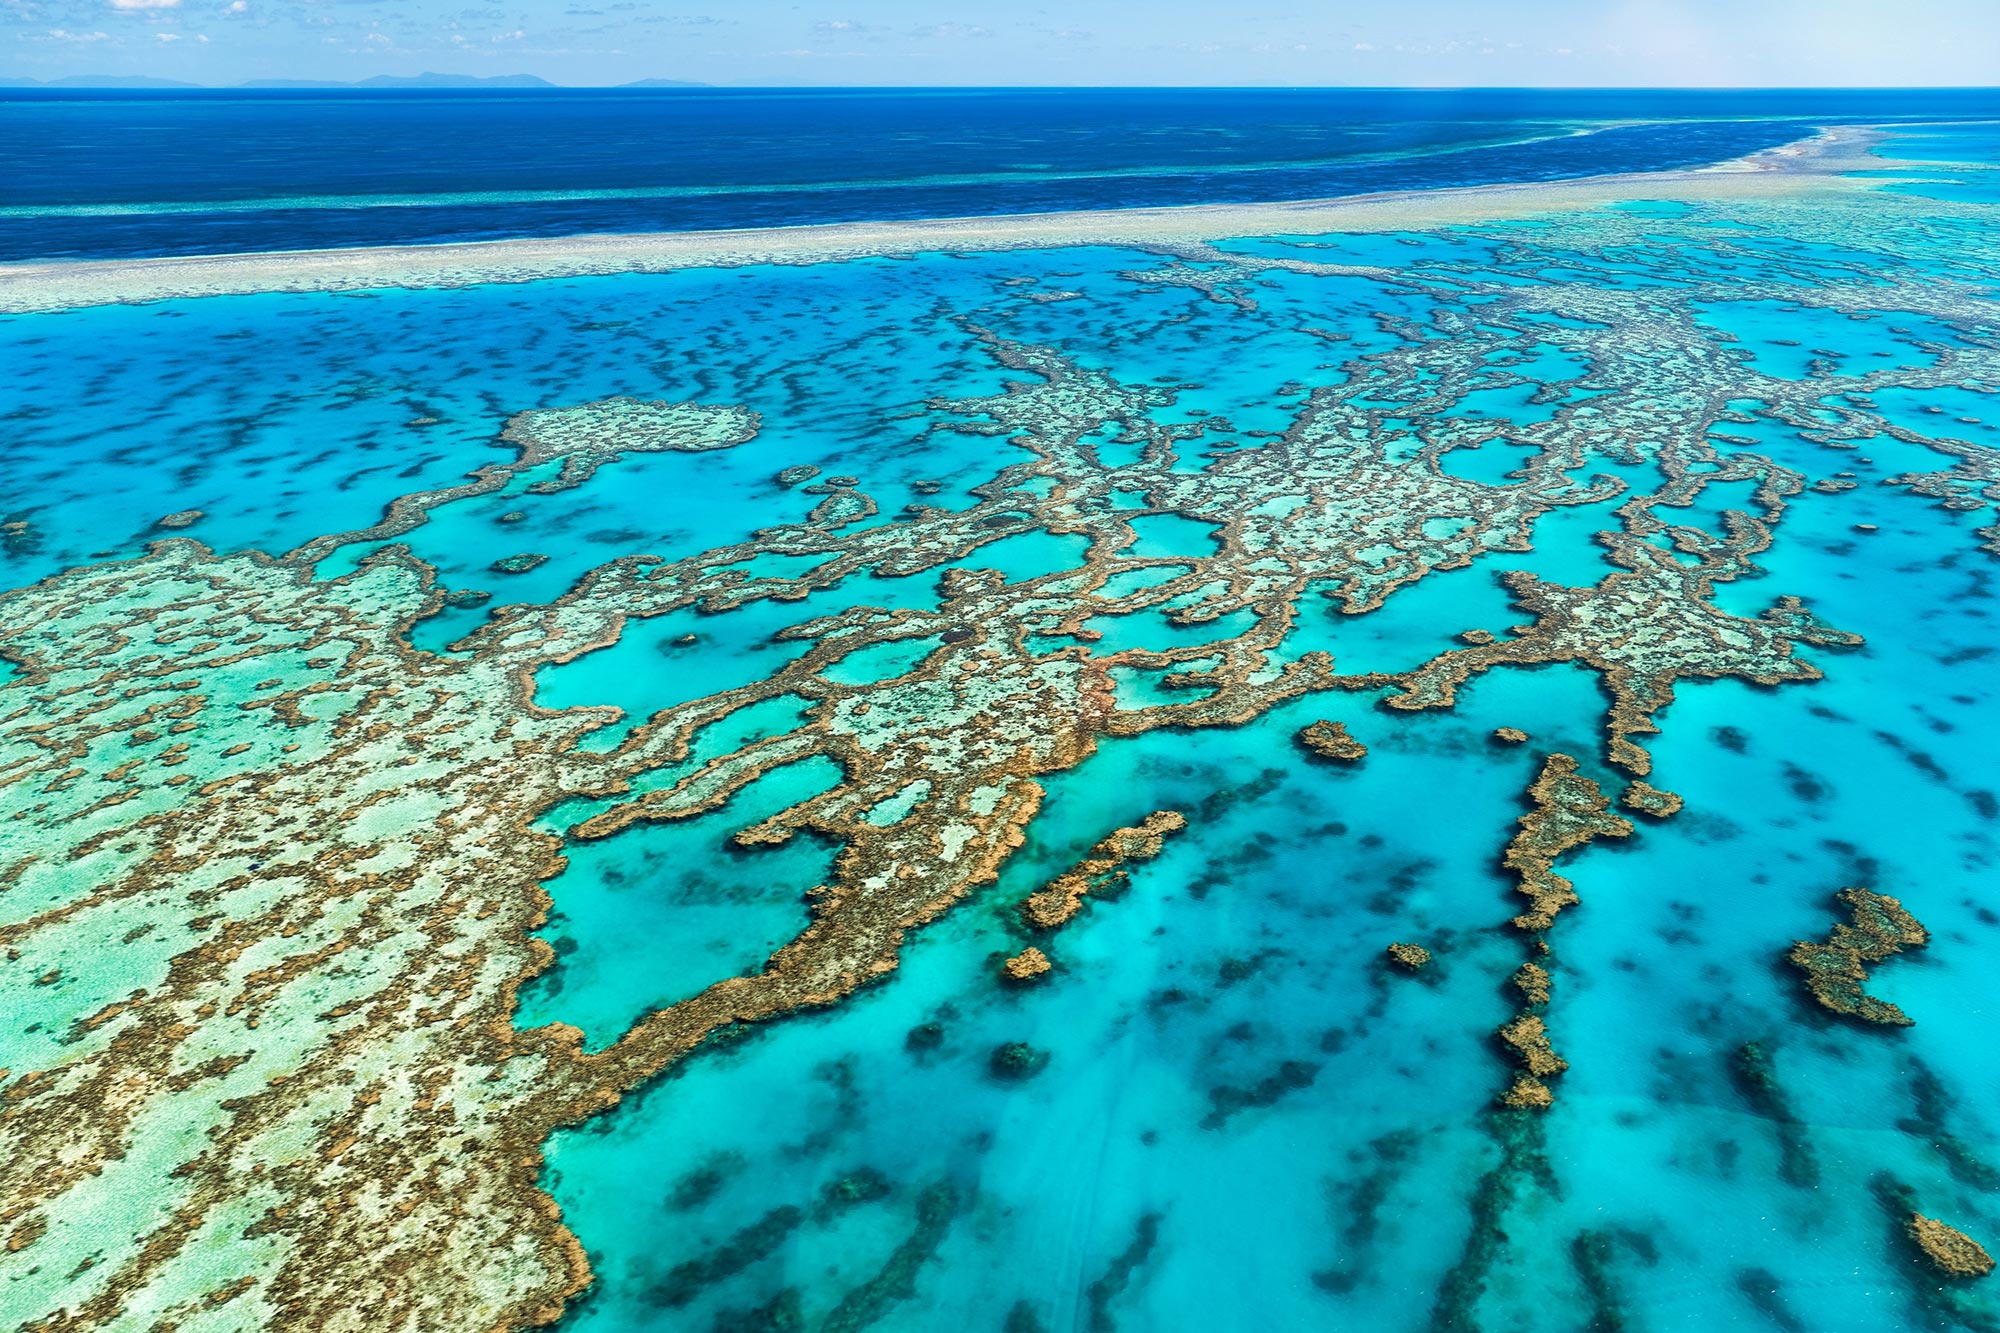 Highest Coral Cover in Central, Northern Great Barrier Reef Since Monitoring Began 36 Years Ago